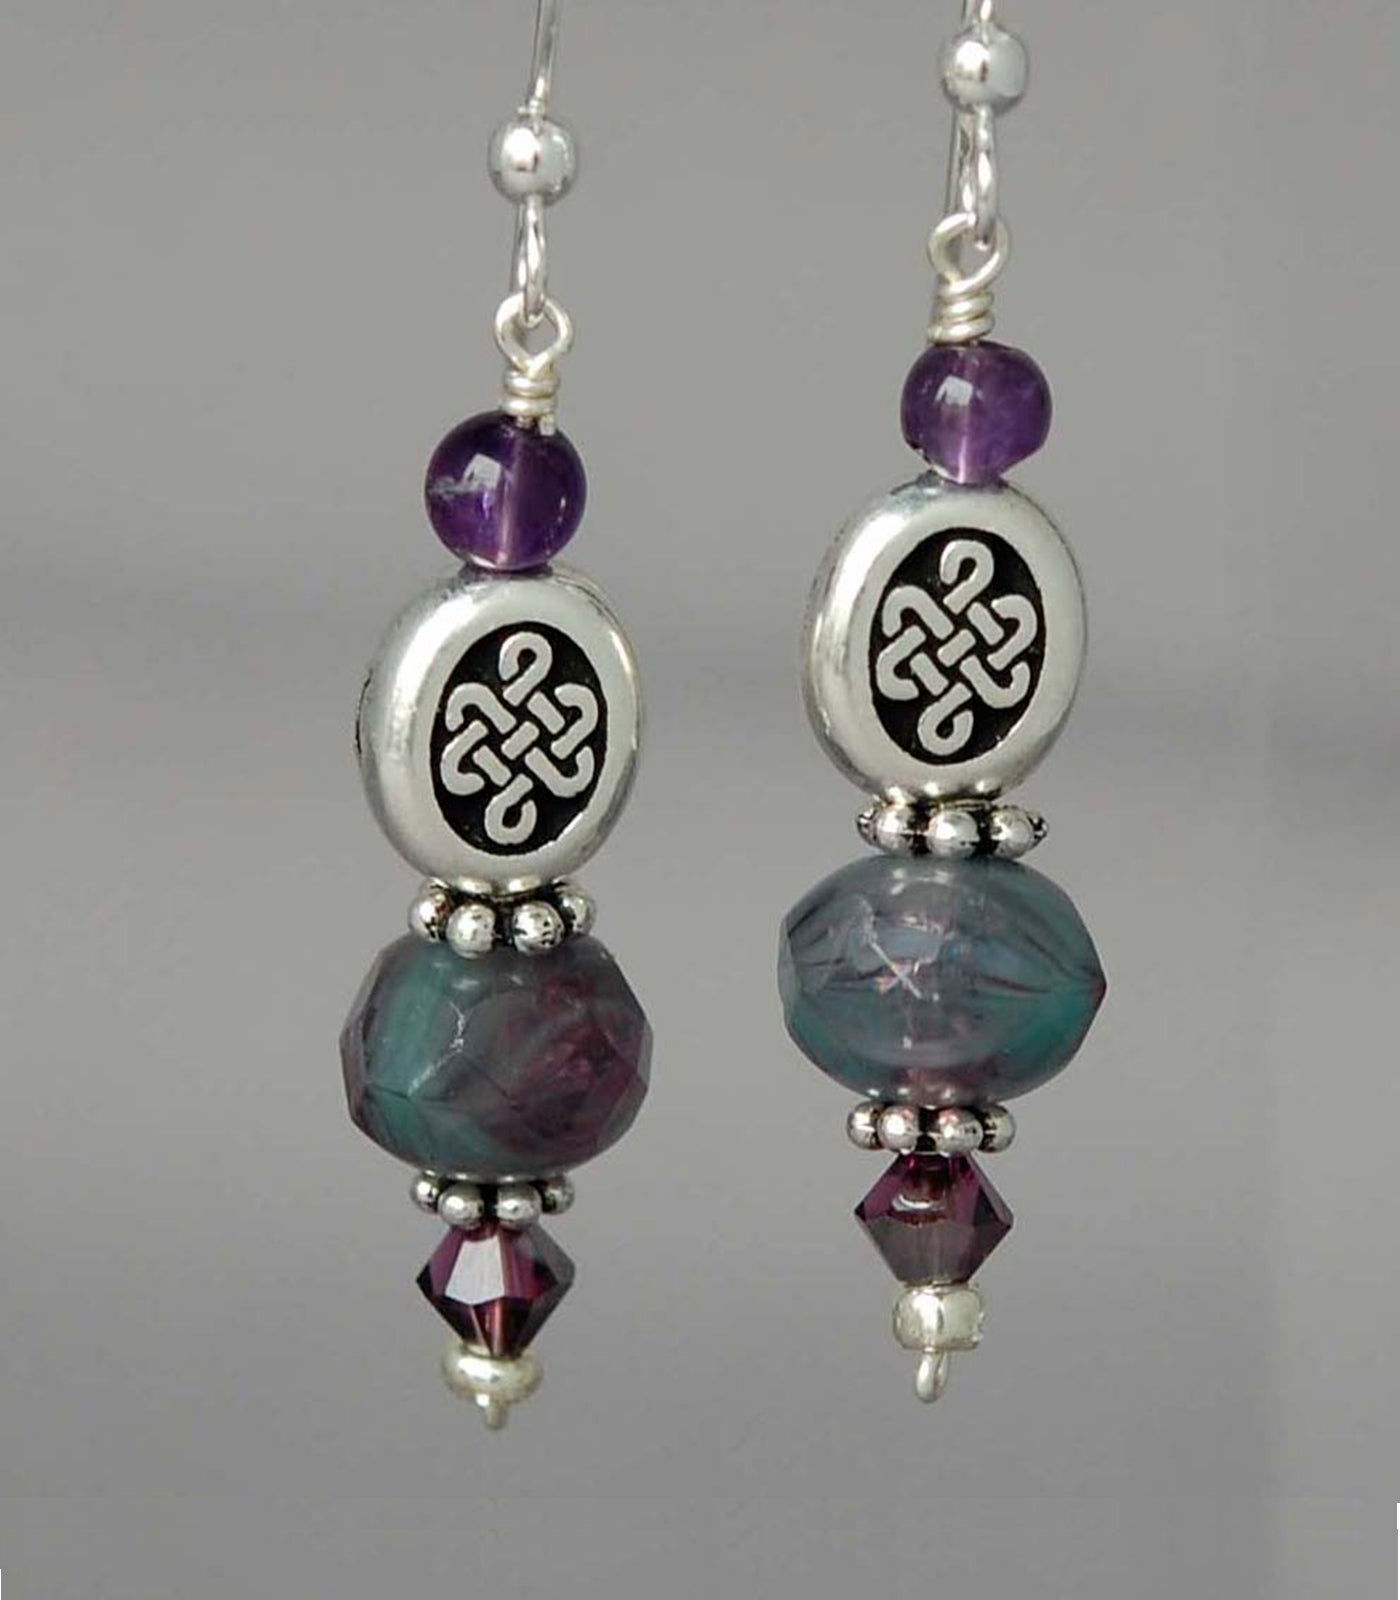 Amethyst and Teal and Lavender Rondelle Bead